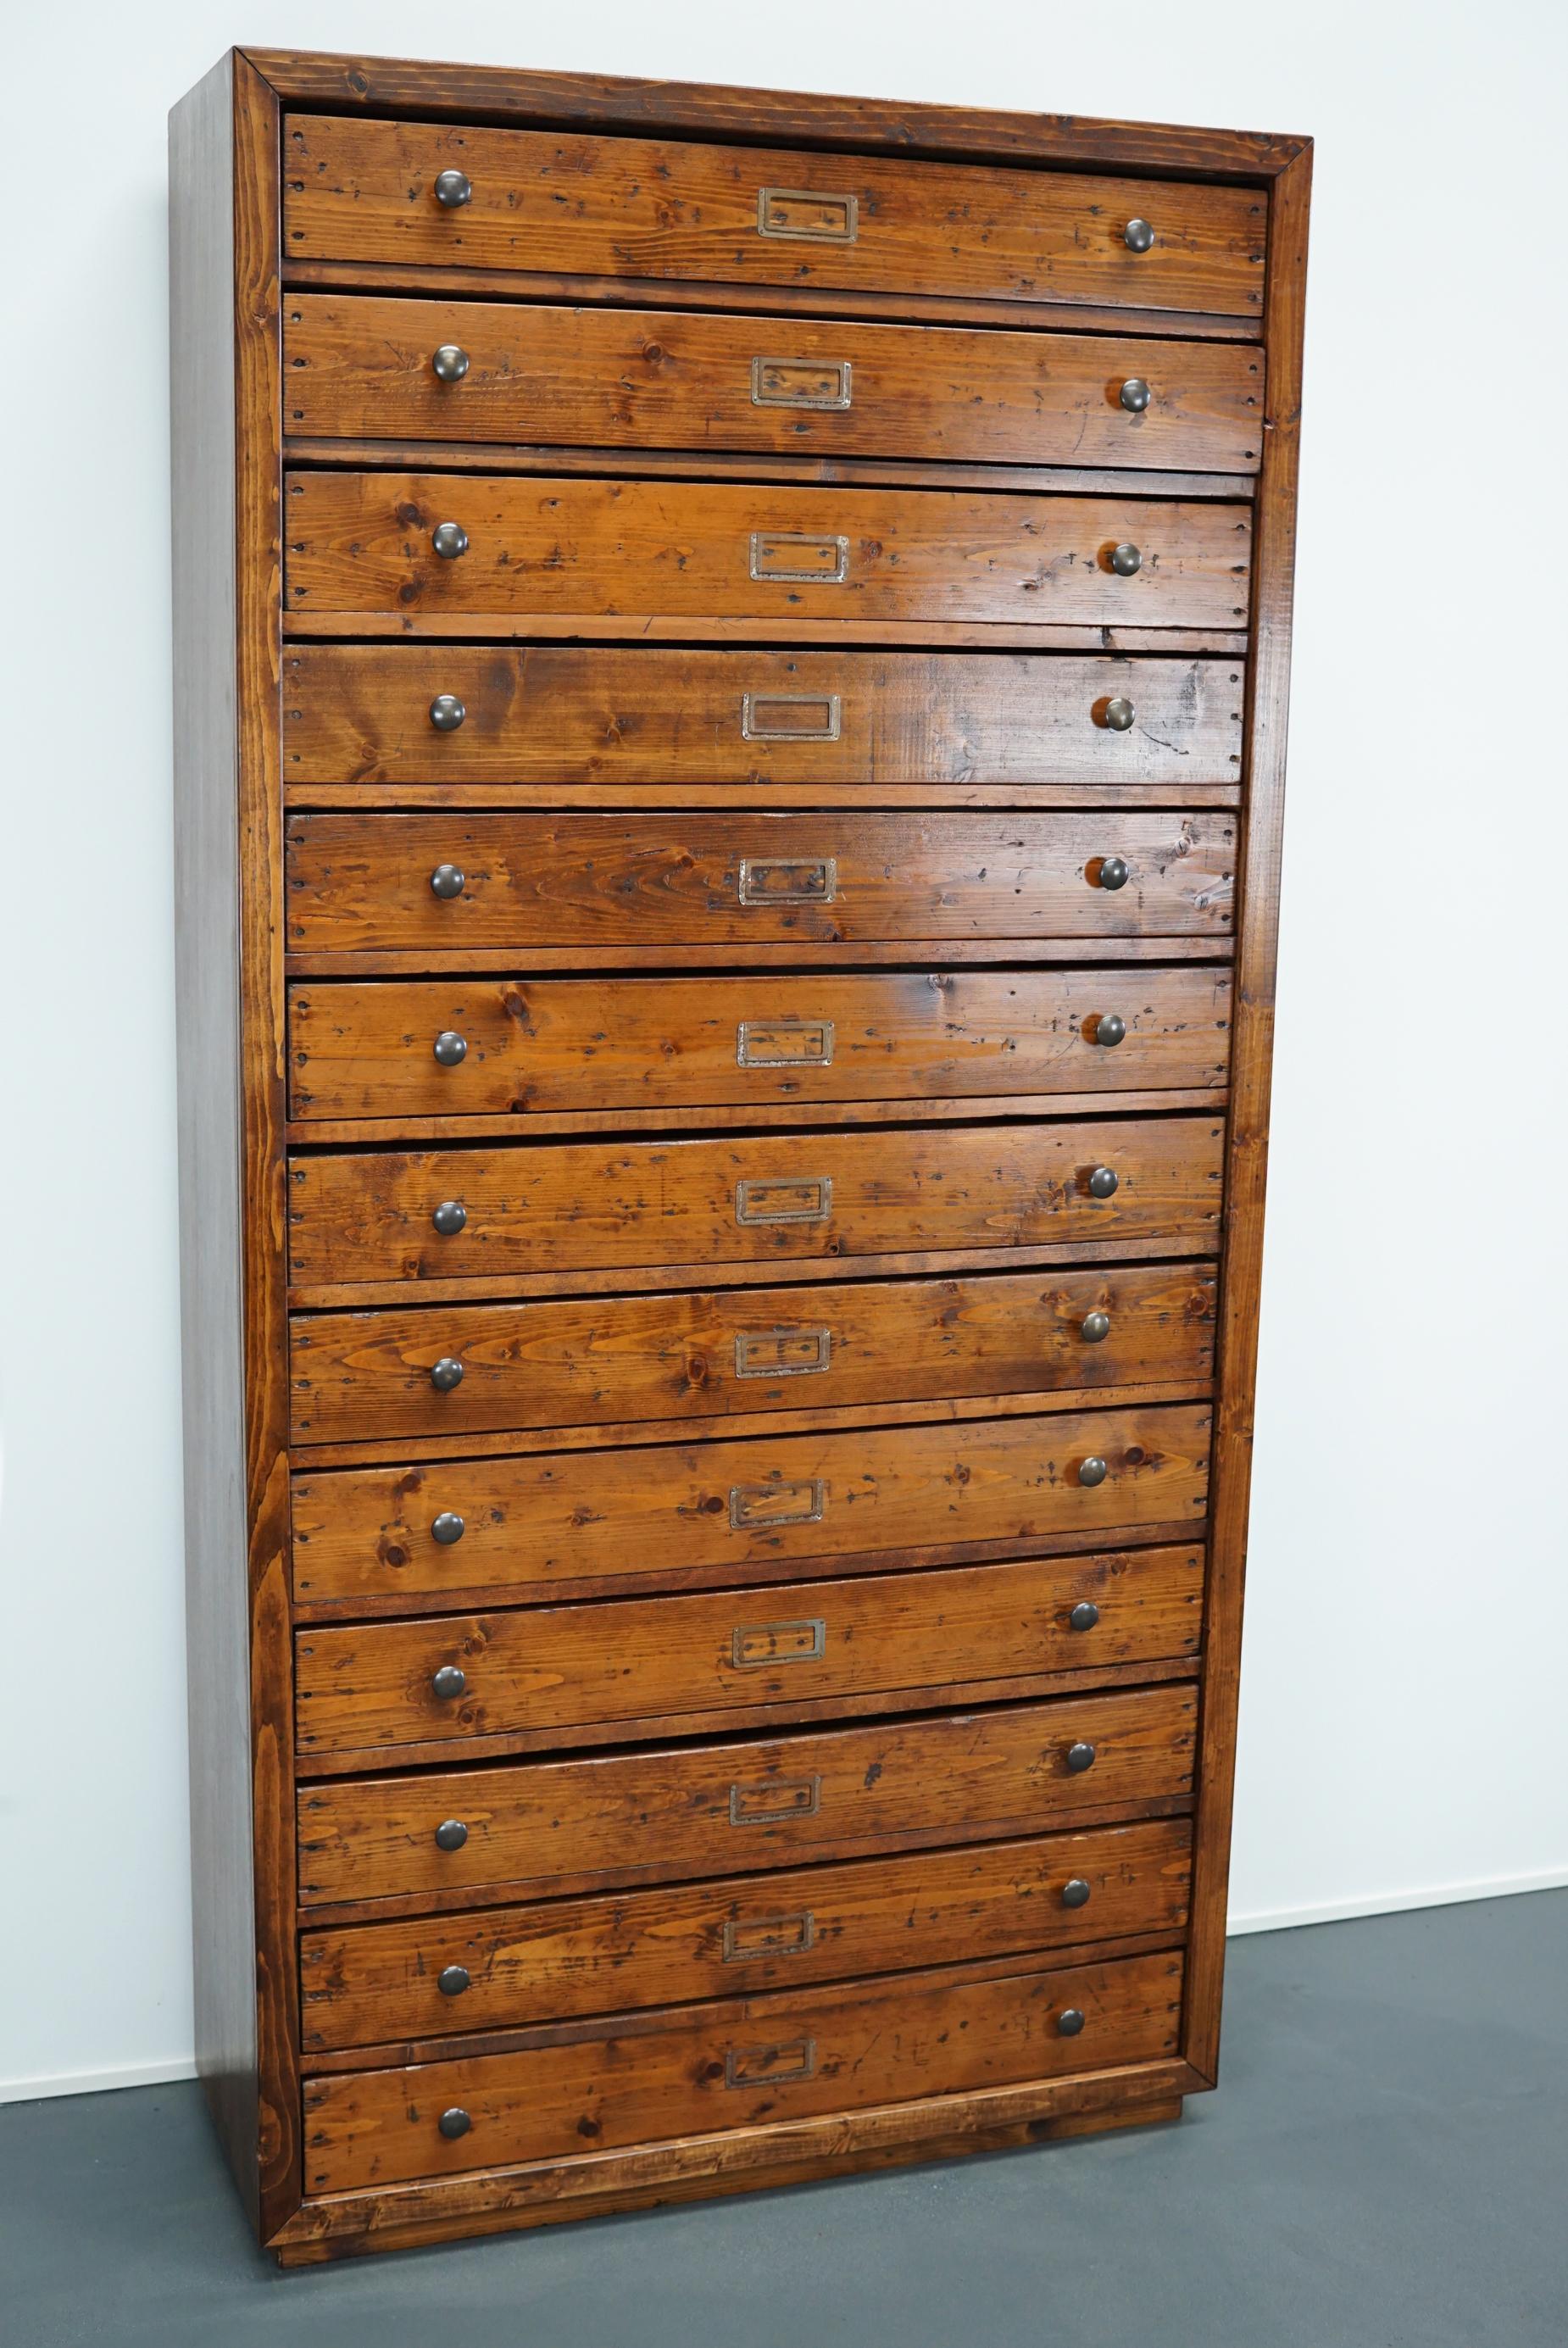 This cabinet was designed and made circa 1940s in the Netherlands. The cabinet features 13 large drawers and is 2 meters tall. It is made of pine with metal hardware. The cabinet is in a good vintage condition and completely restored. The inside